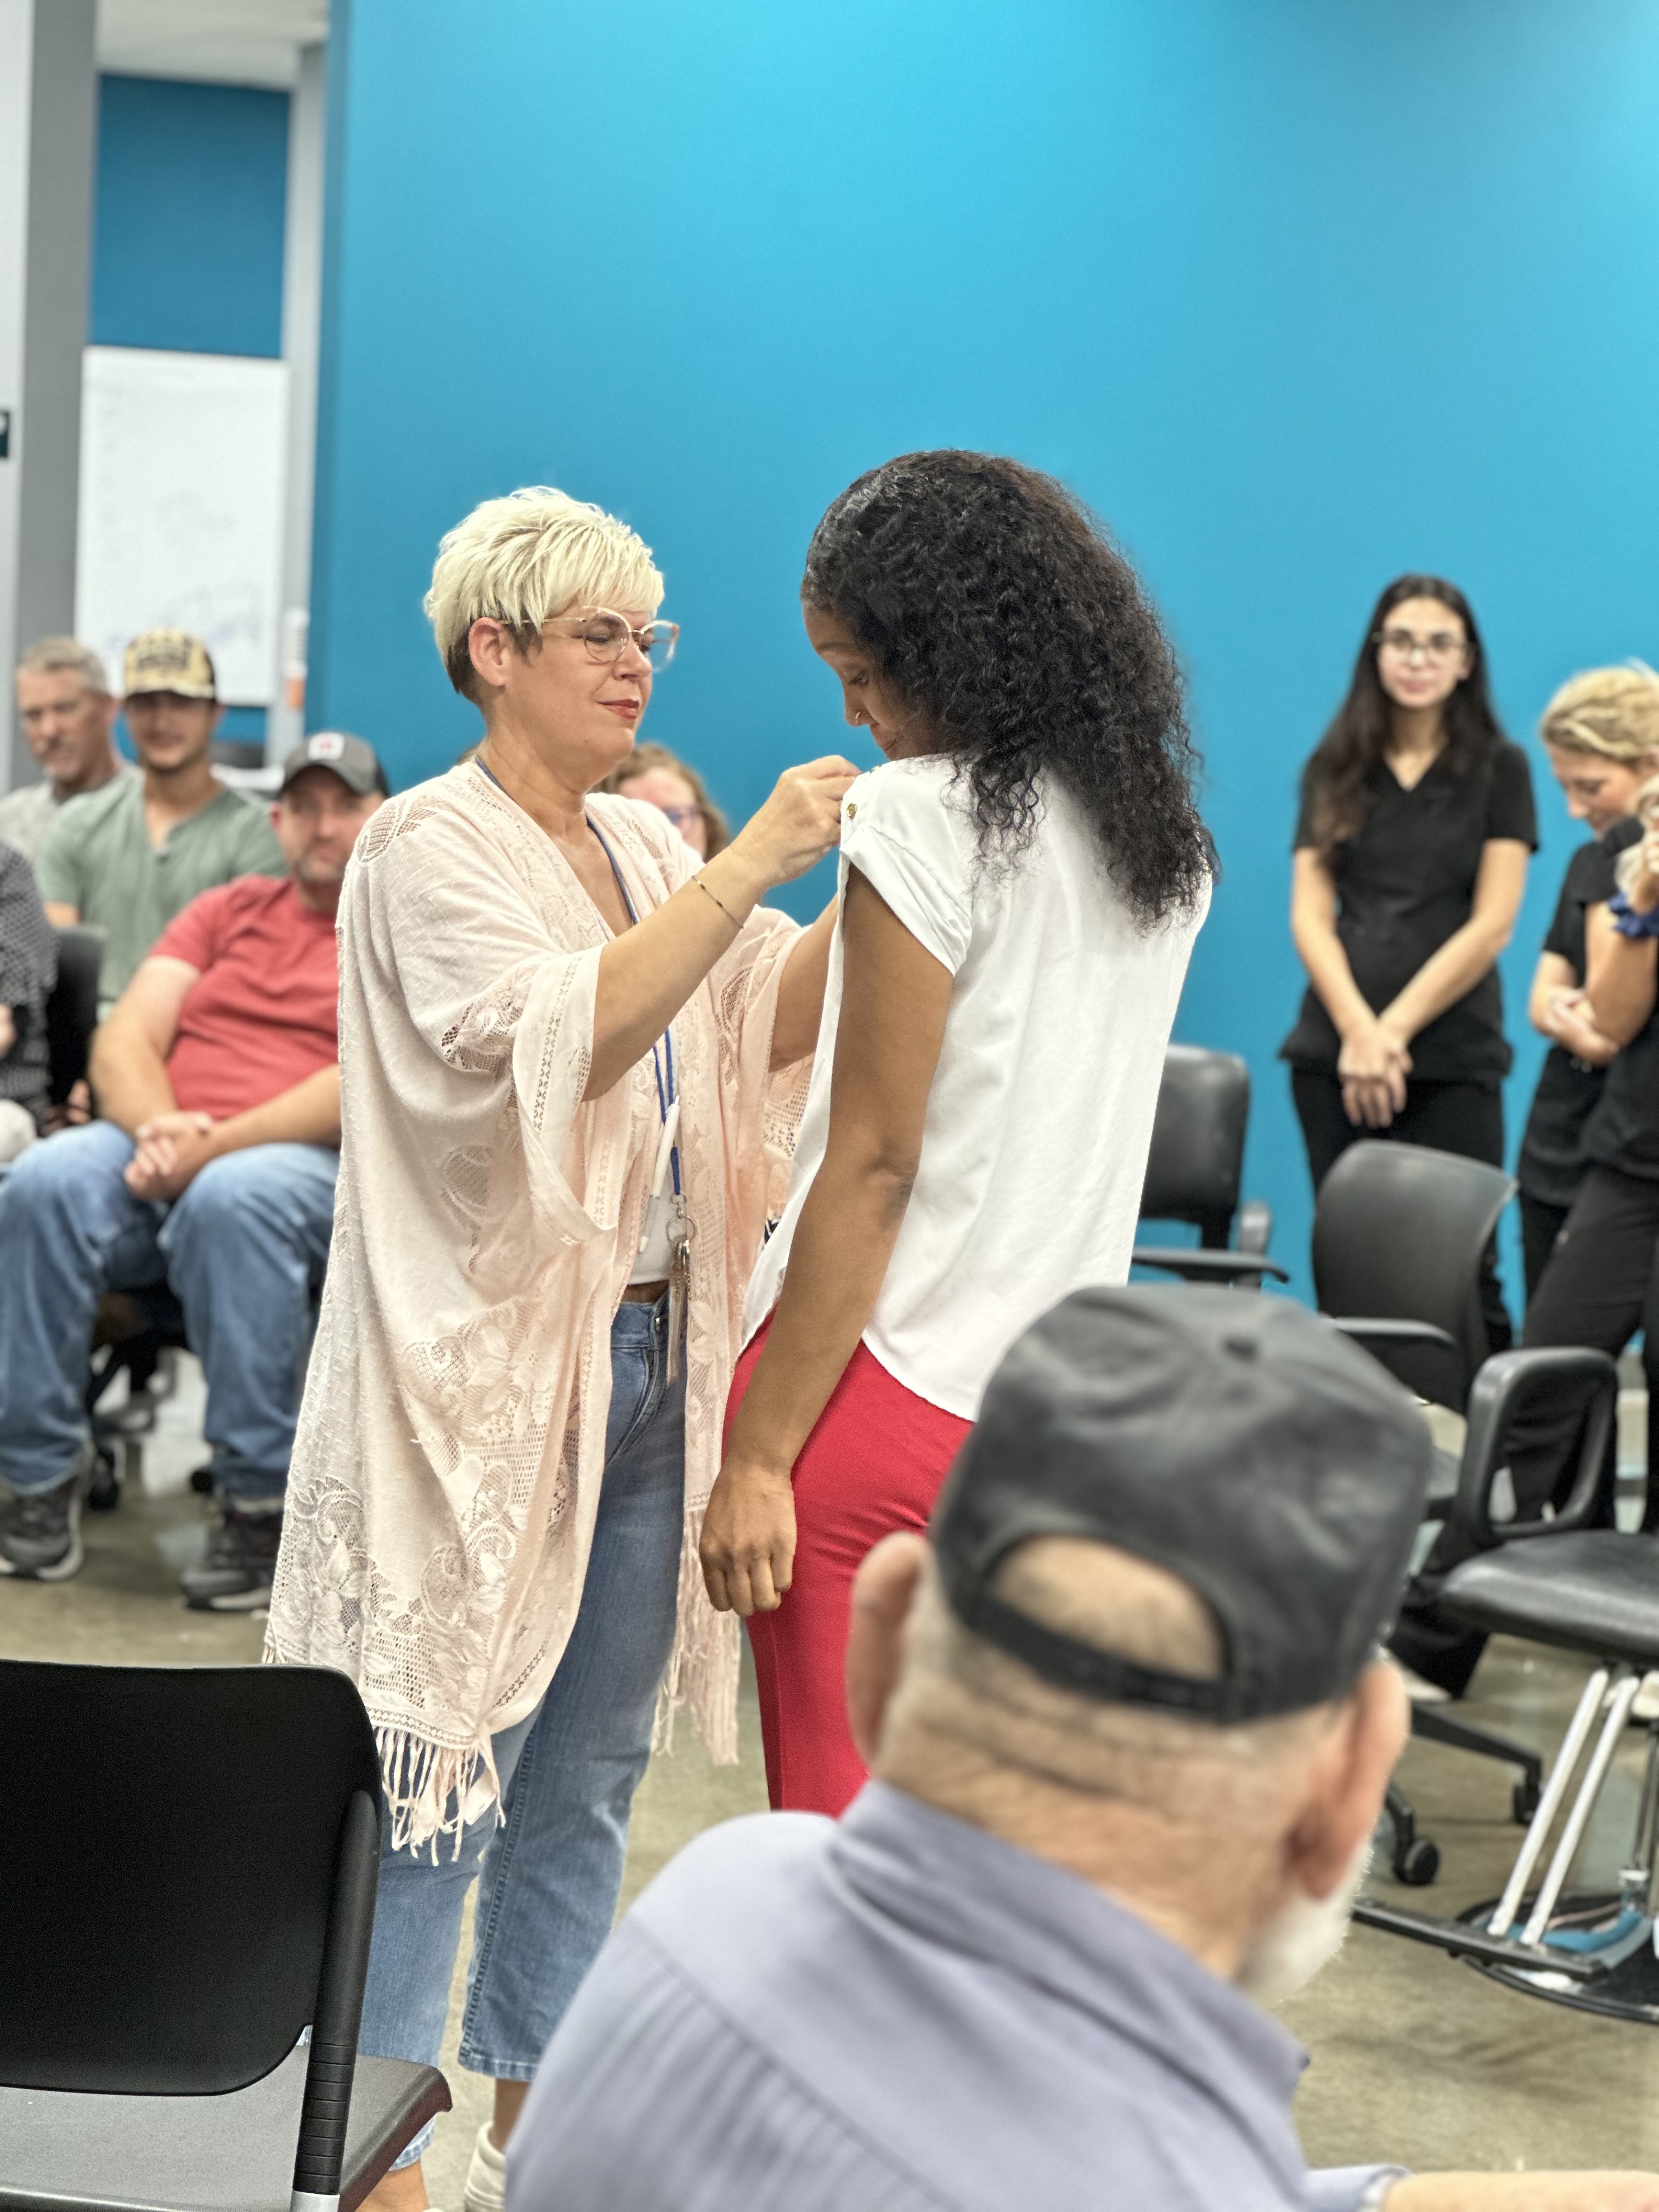 Cosmetology Instructor Placing Pin on Student